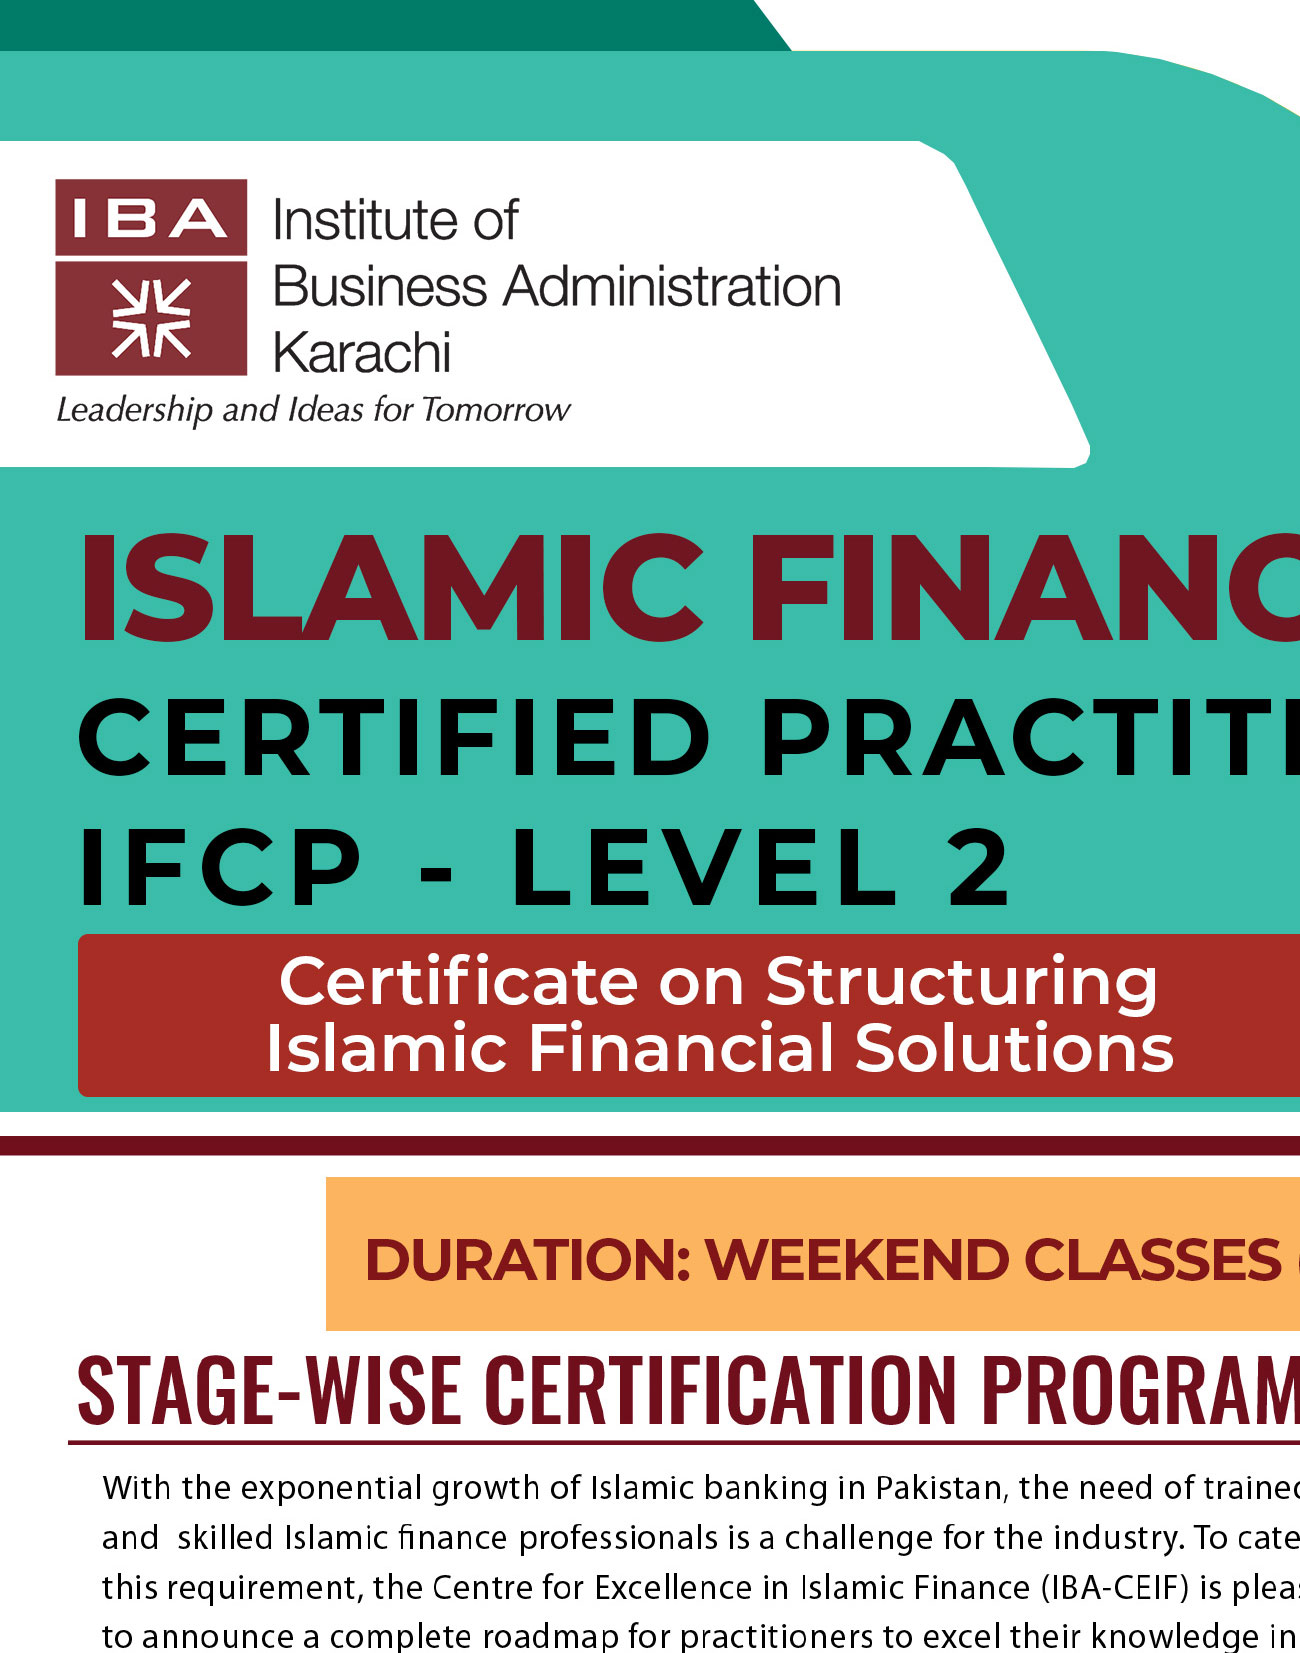 Islamic Finance and its application in branch operations